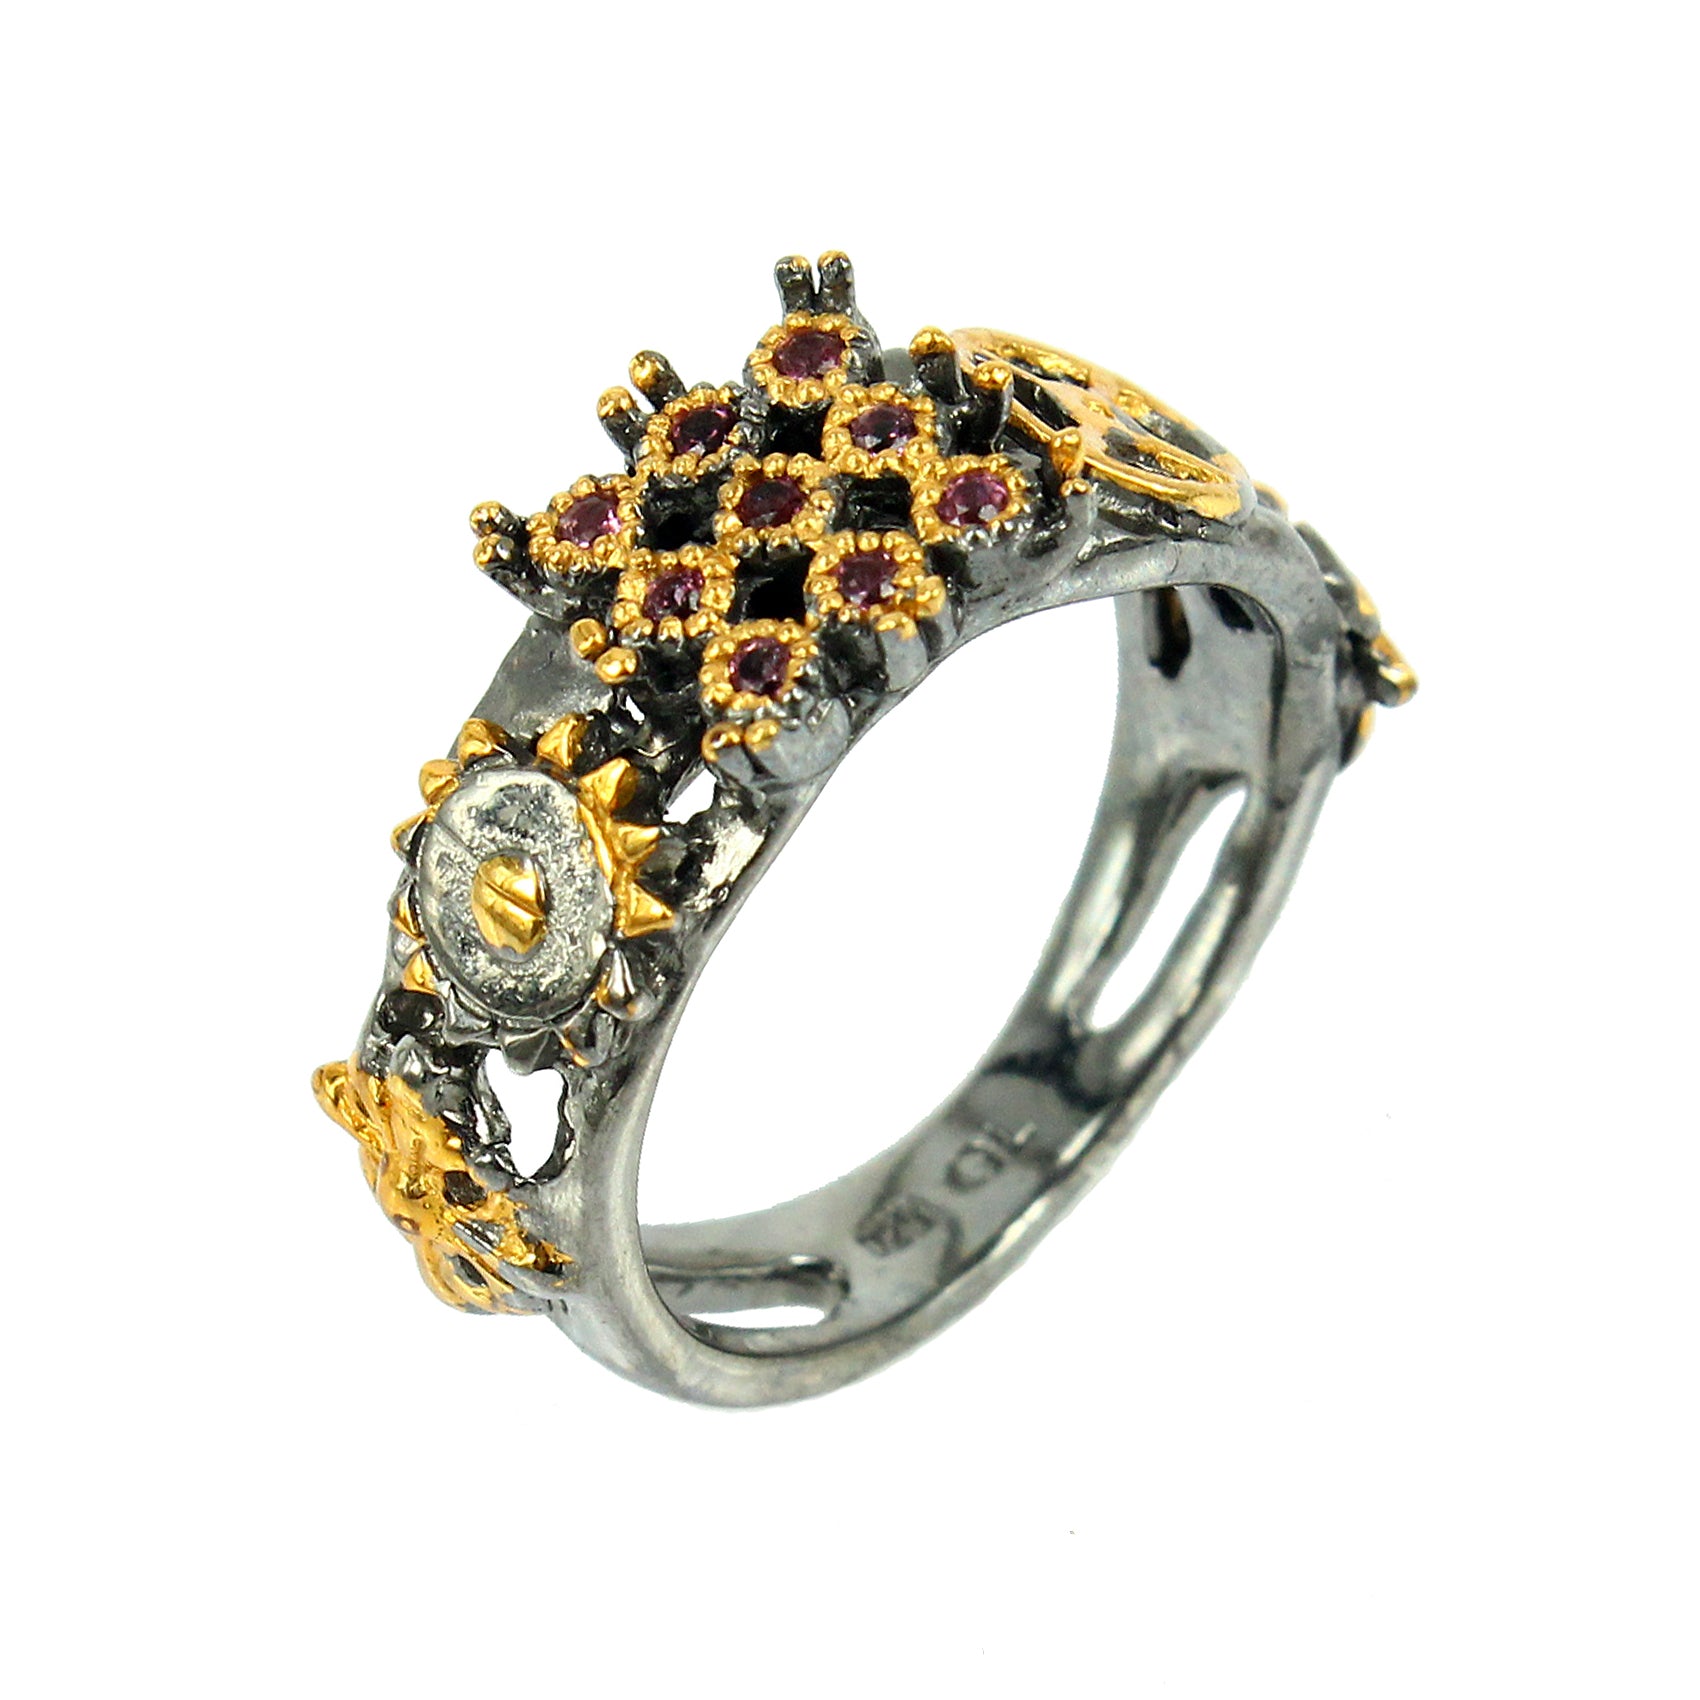 SteamPunk - 925 Sterling Silver Ring, Decorated with Garnets, Plated with 3 Micron 22K Yellow Gold and Grey Ruthenium